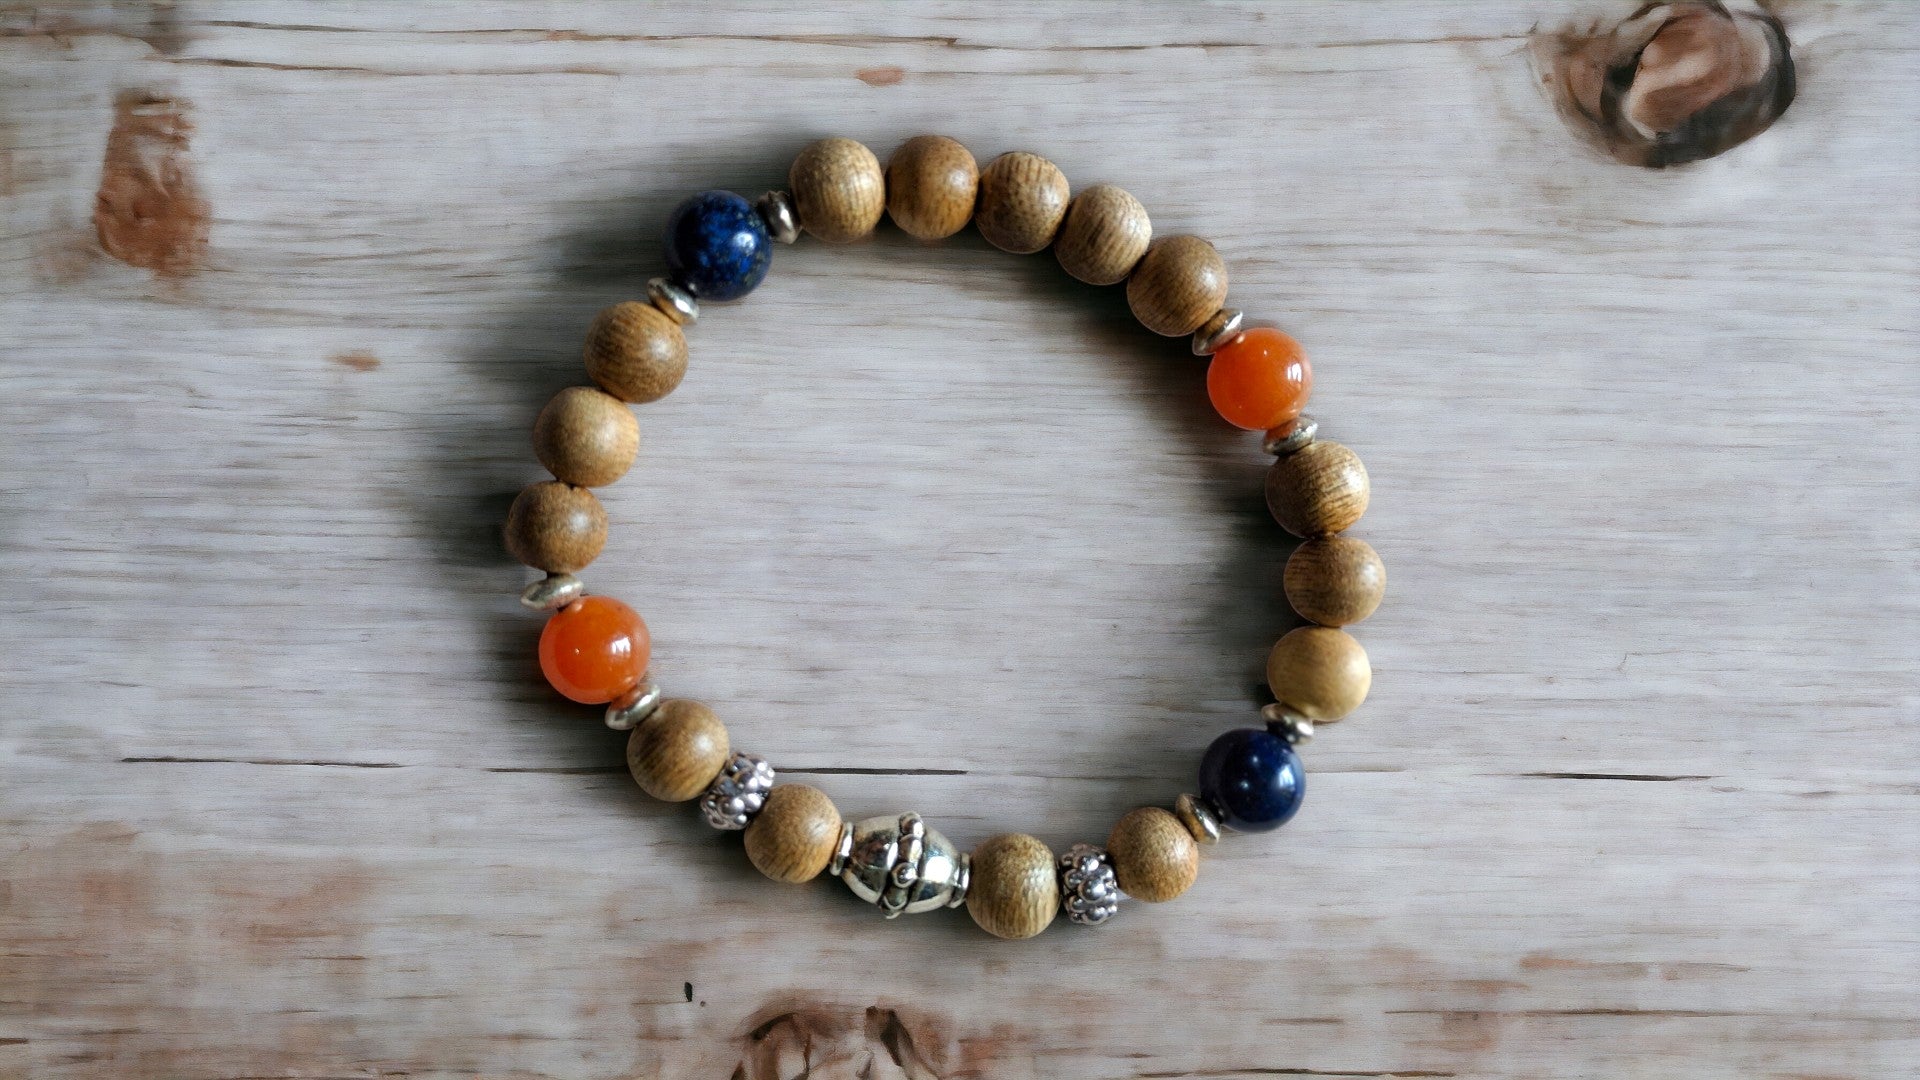 *New* The 4 Elements Metal, Wood, Water, Fire cultivated agarwood gemstone bracelet